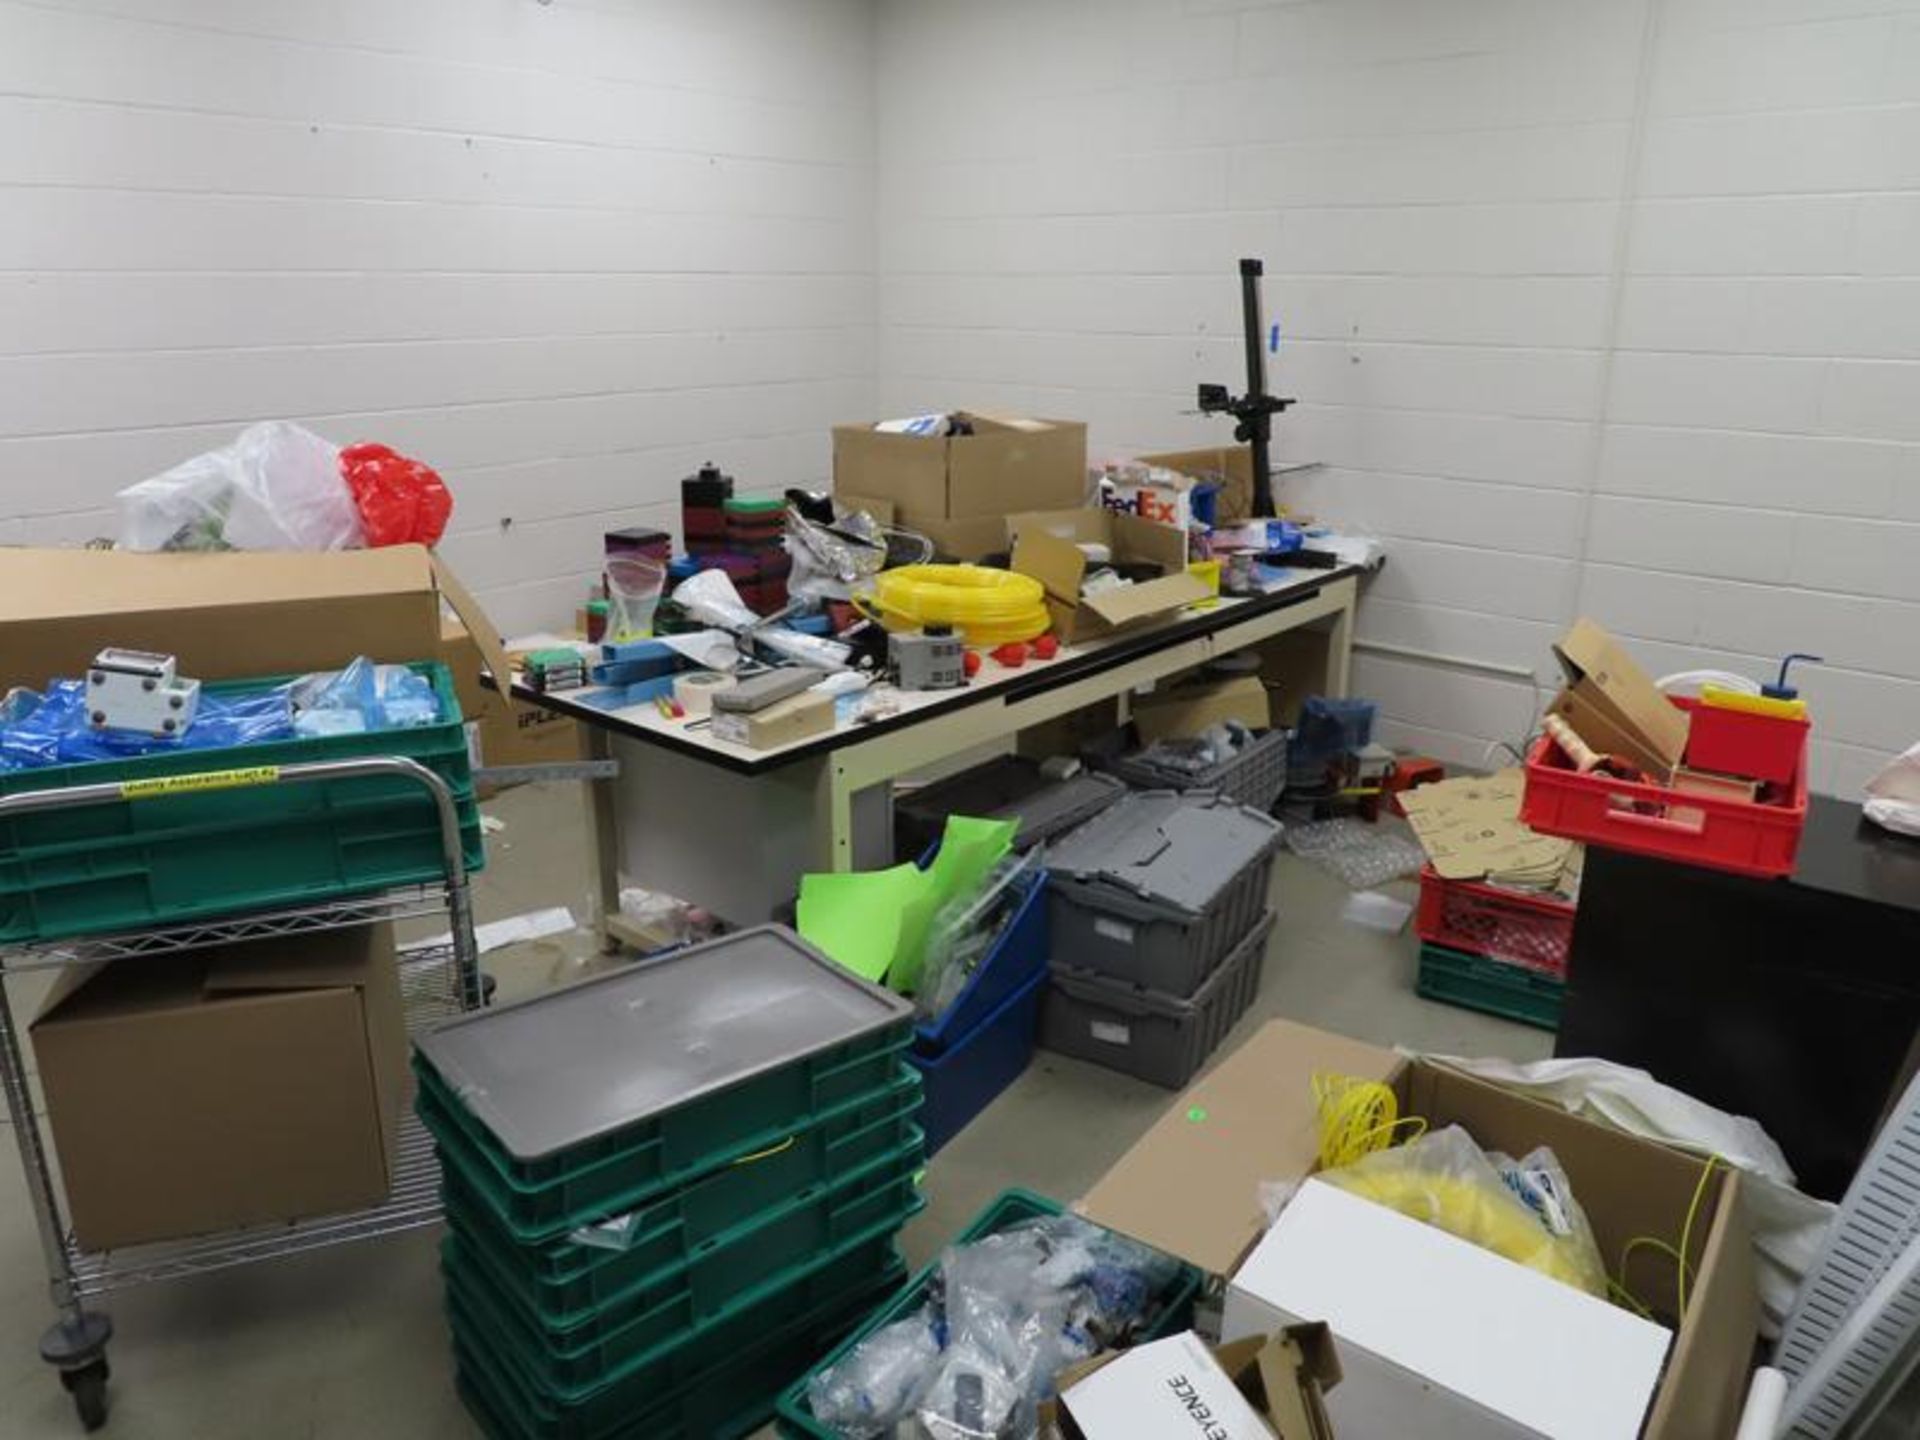 Contents of Room including carts, work tables, Parts, File Cabinet, Moorefeed Corp Vibratory Feeder